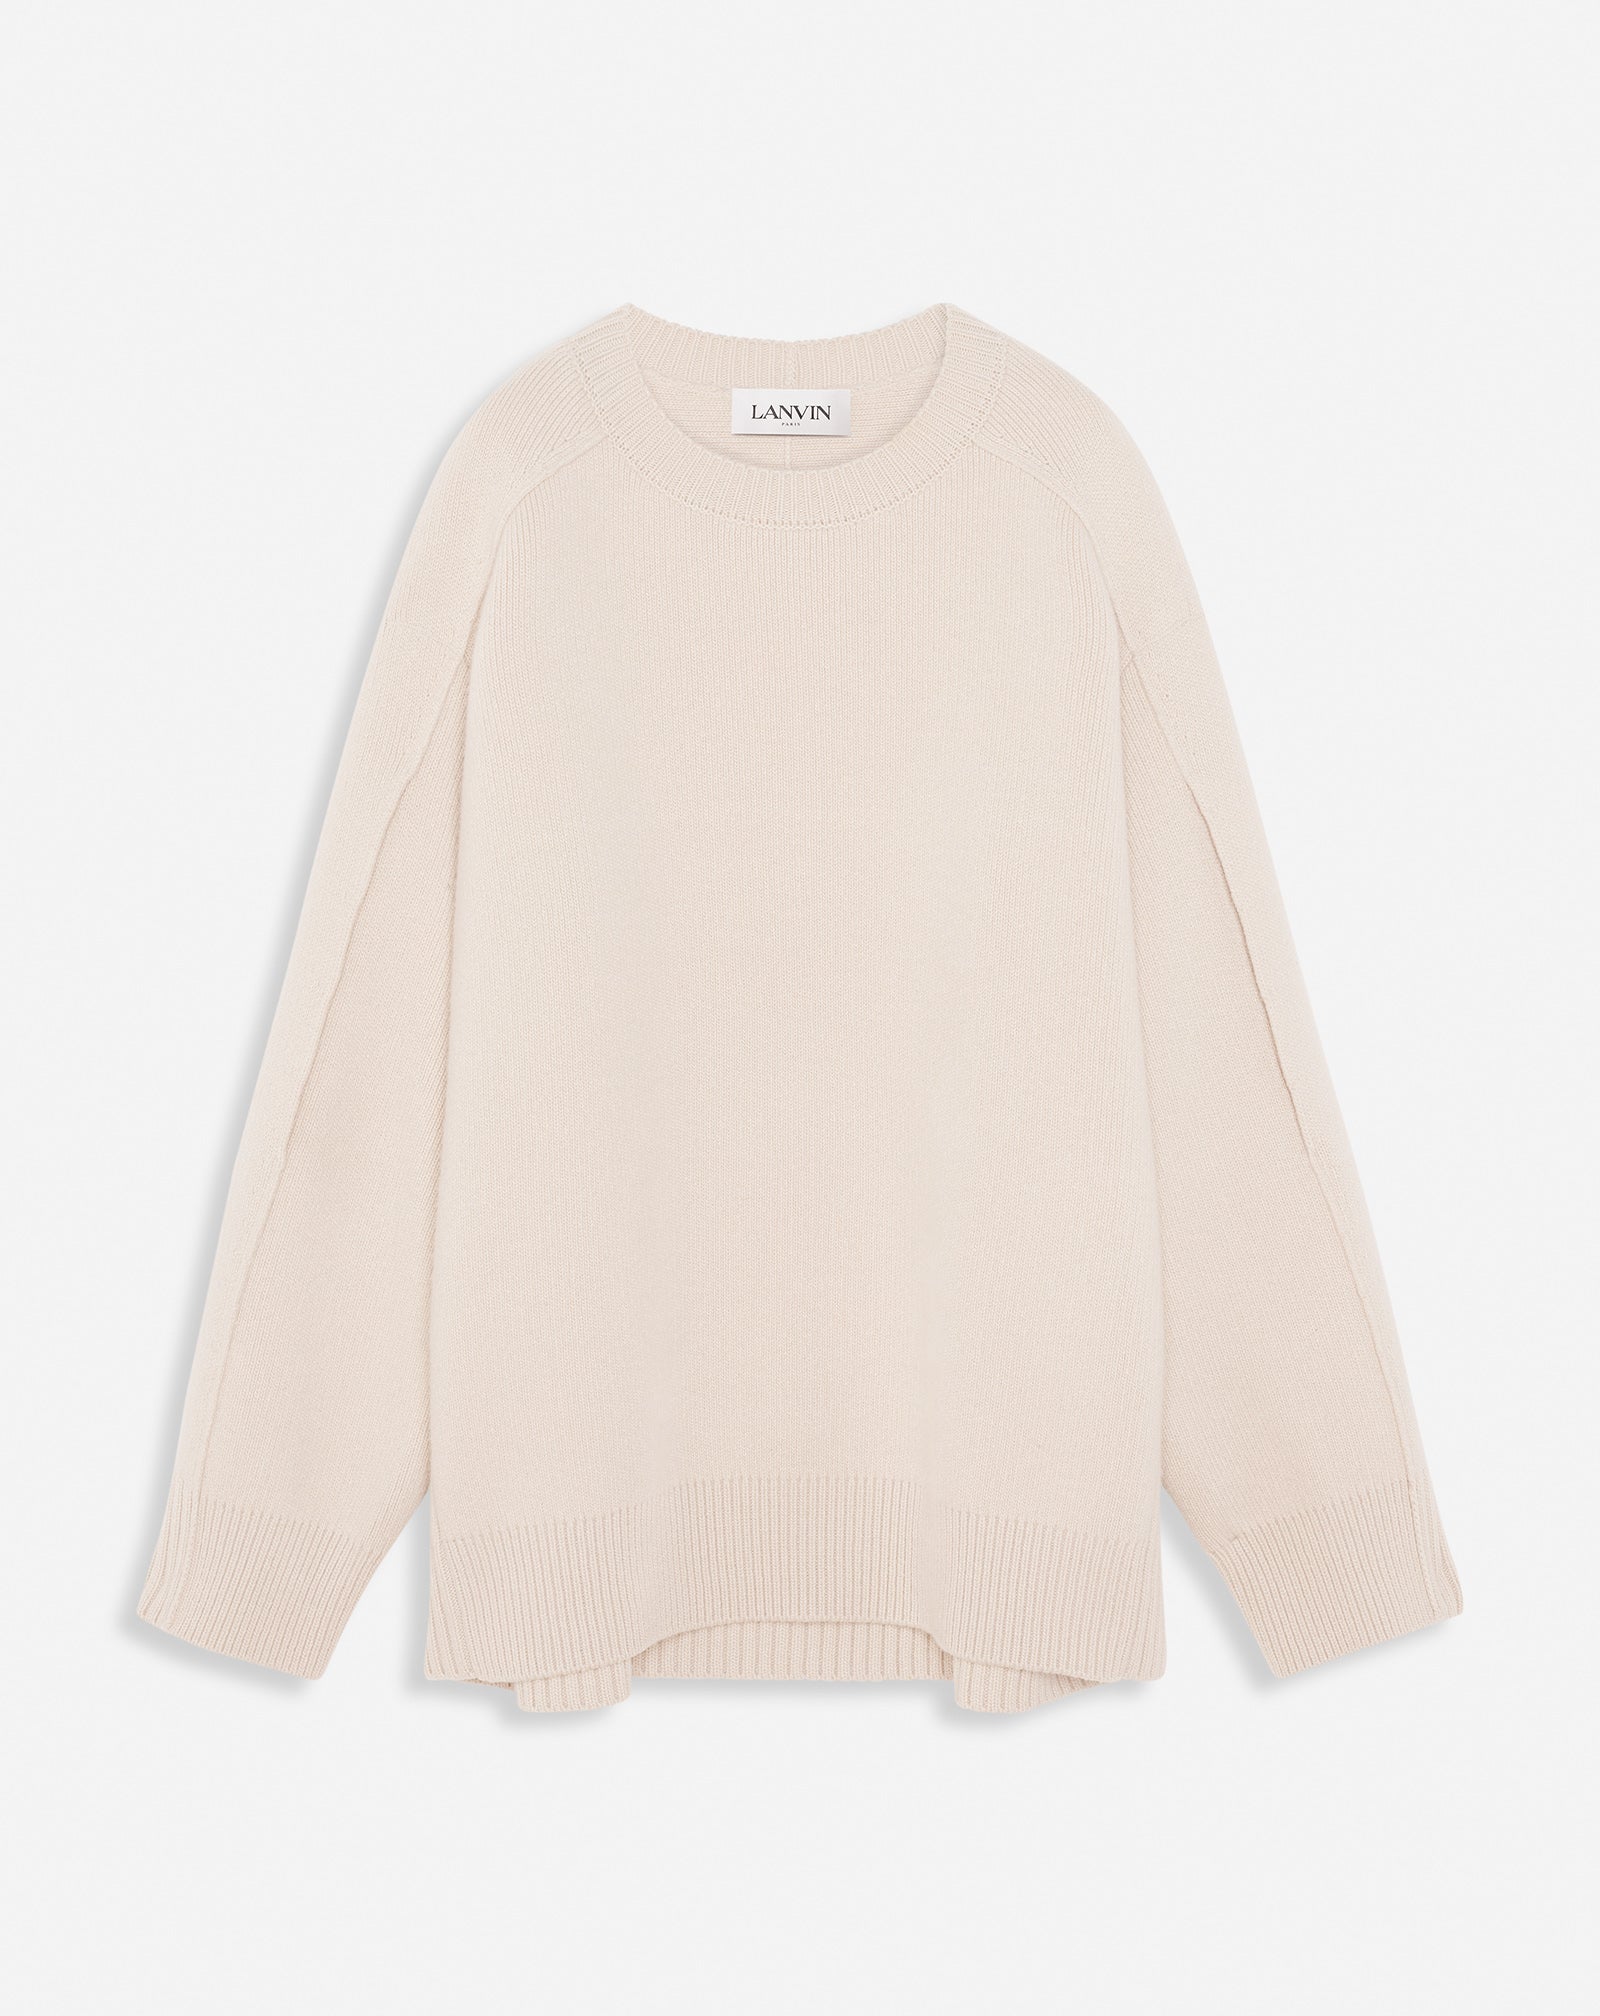 WOOL AND CASHMERE ROUND-NECK CAPE SWEATER, PAPER